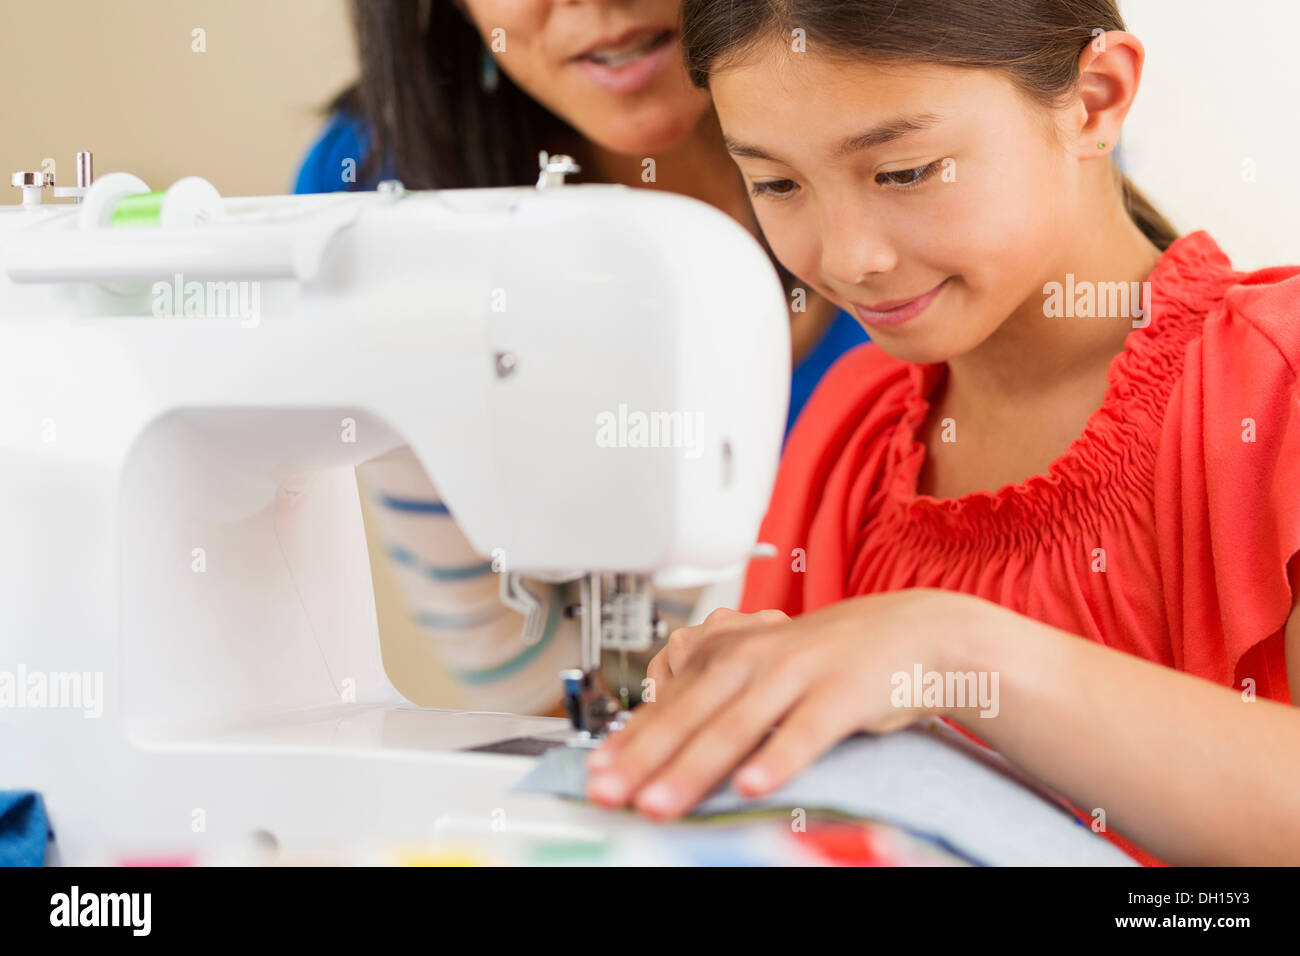 Mother teaching girl to use sewing machine Stock Photo